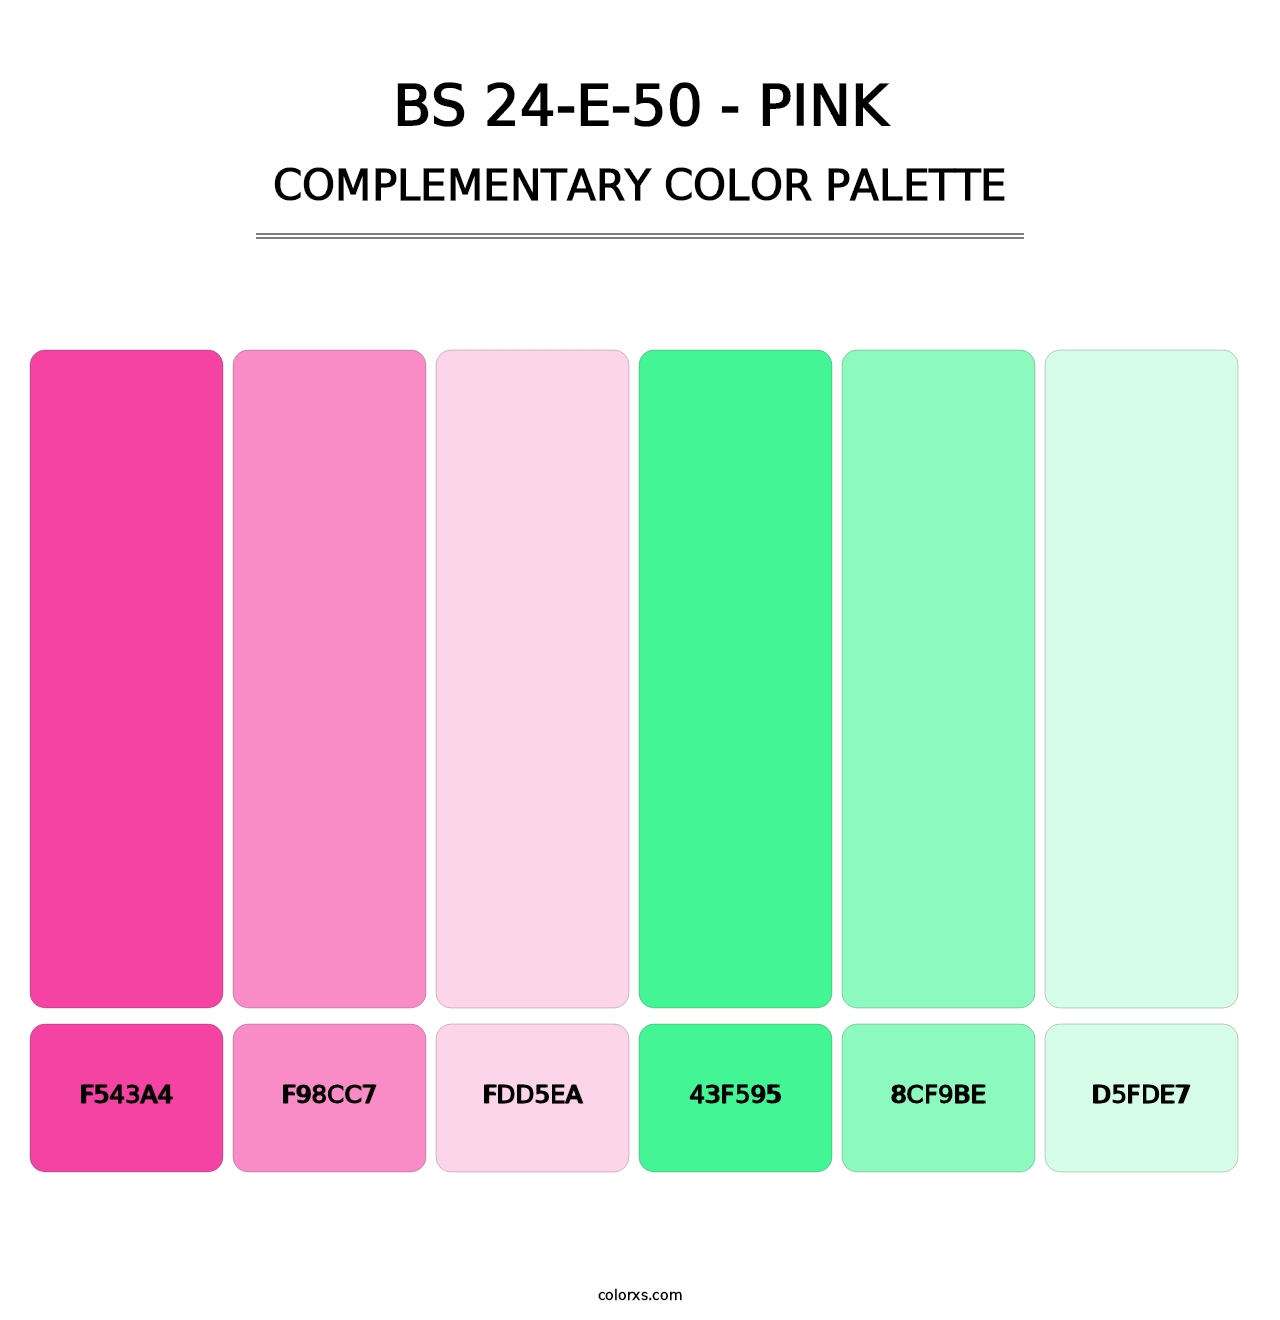 BS 24-E-50 - Pink - Complementary Color Palette